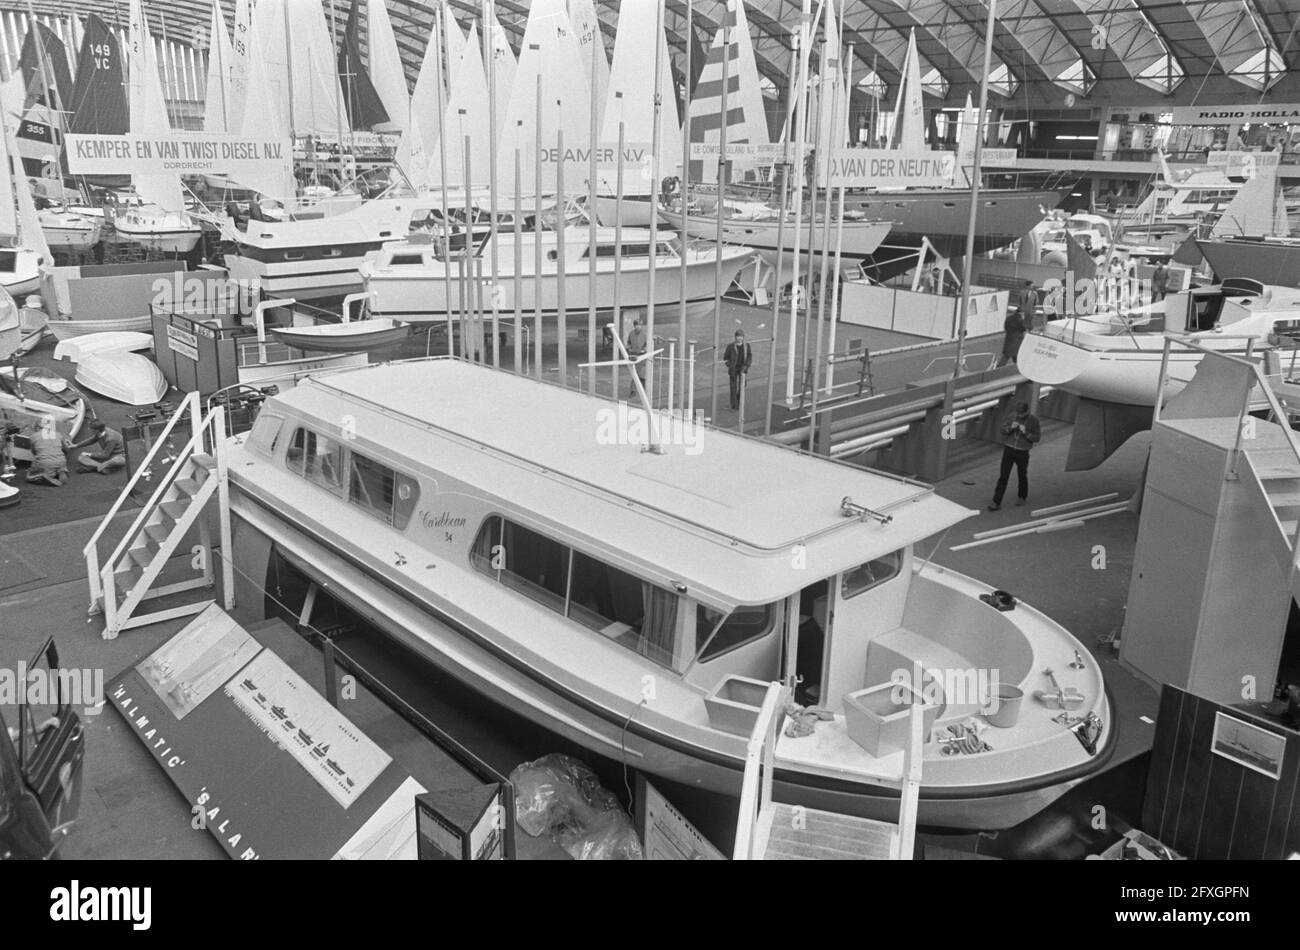 Fifteenth HISWA in RAI Amsterdam. Preparations. Boat with parachute, March 12, 1970, The Netherlands, 20th century press agency photo, news to remember, documentary, historic photography 1945-1990, visual stories, human history of the Twentieth Century, capturing moments in time Stock Photo